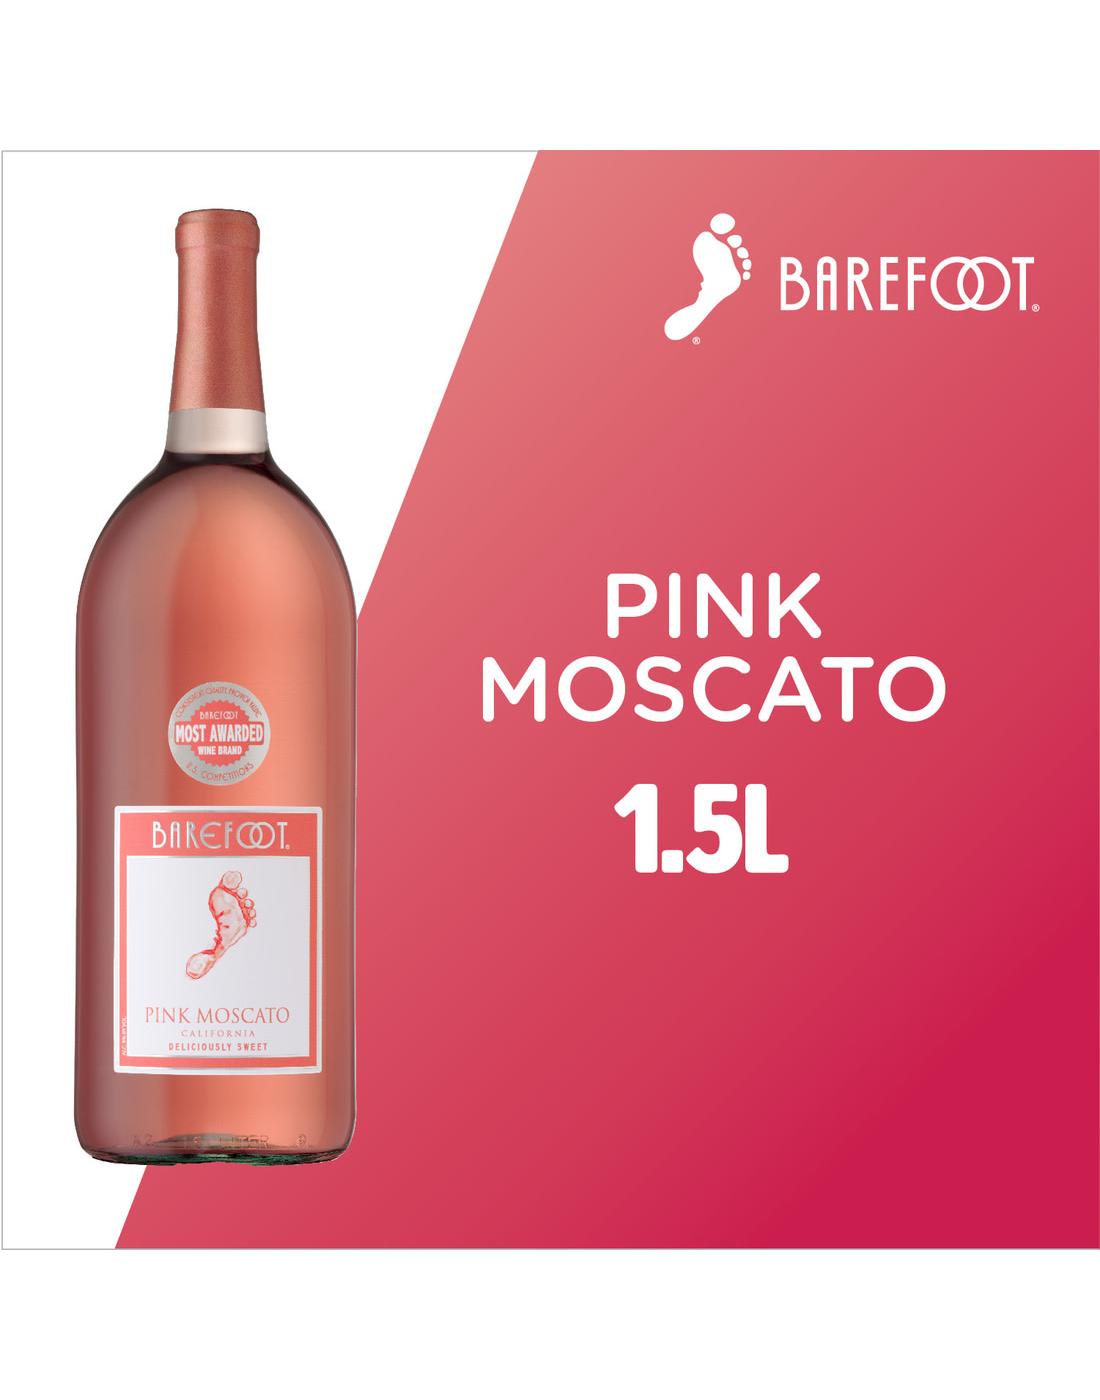 Barefoot Pink Moscato Wine; image 6 of 7